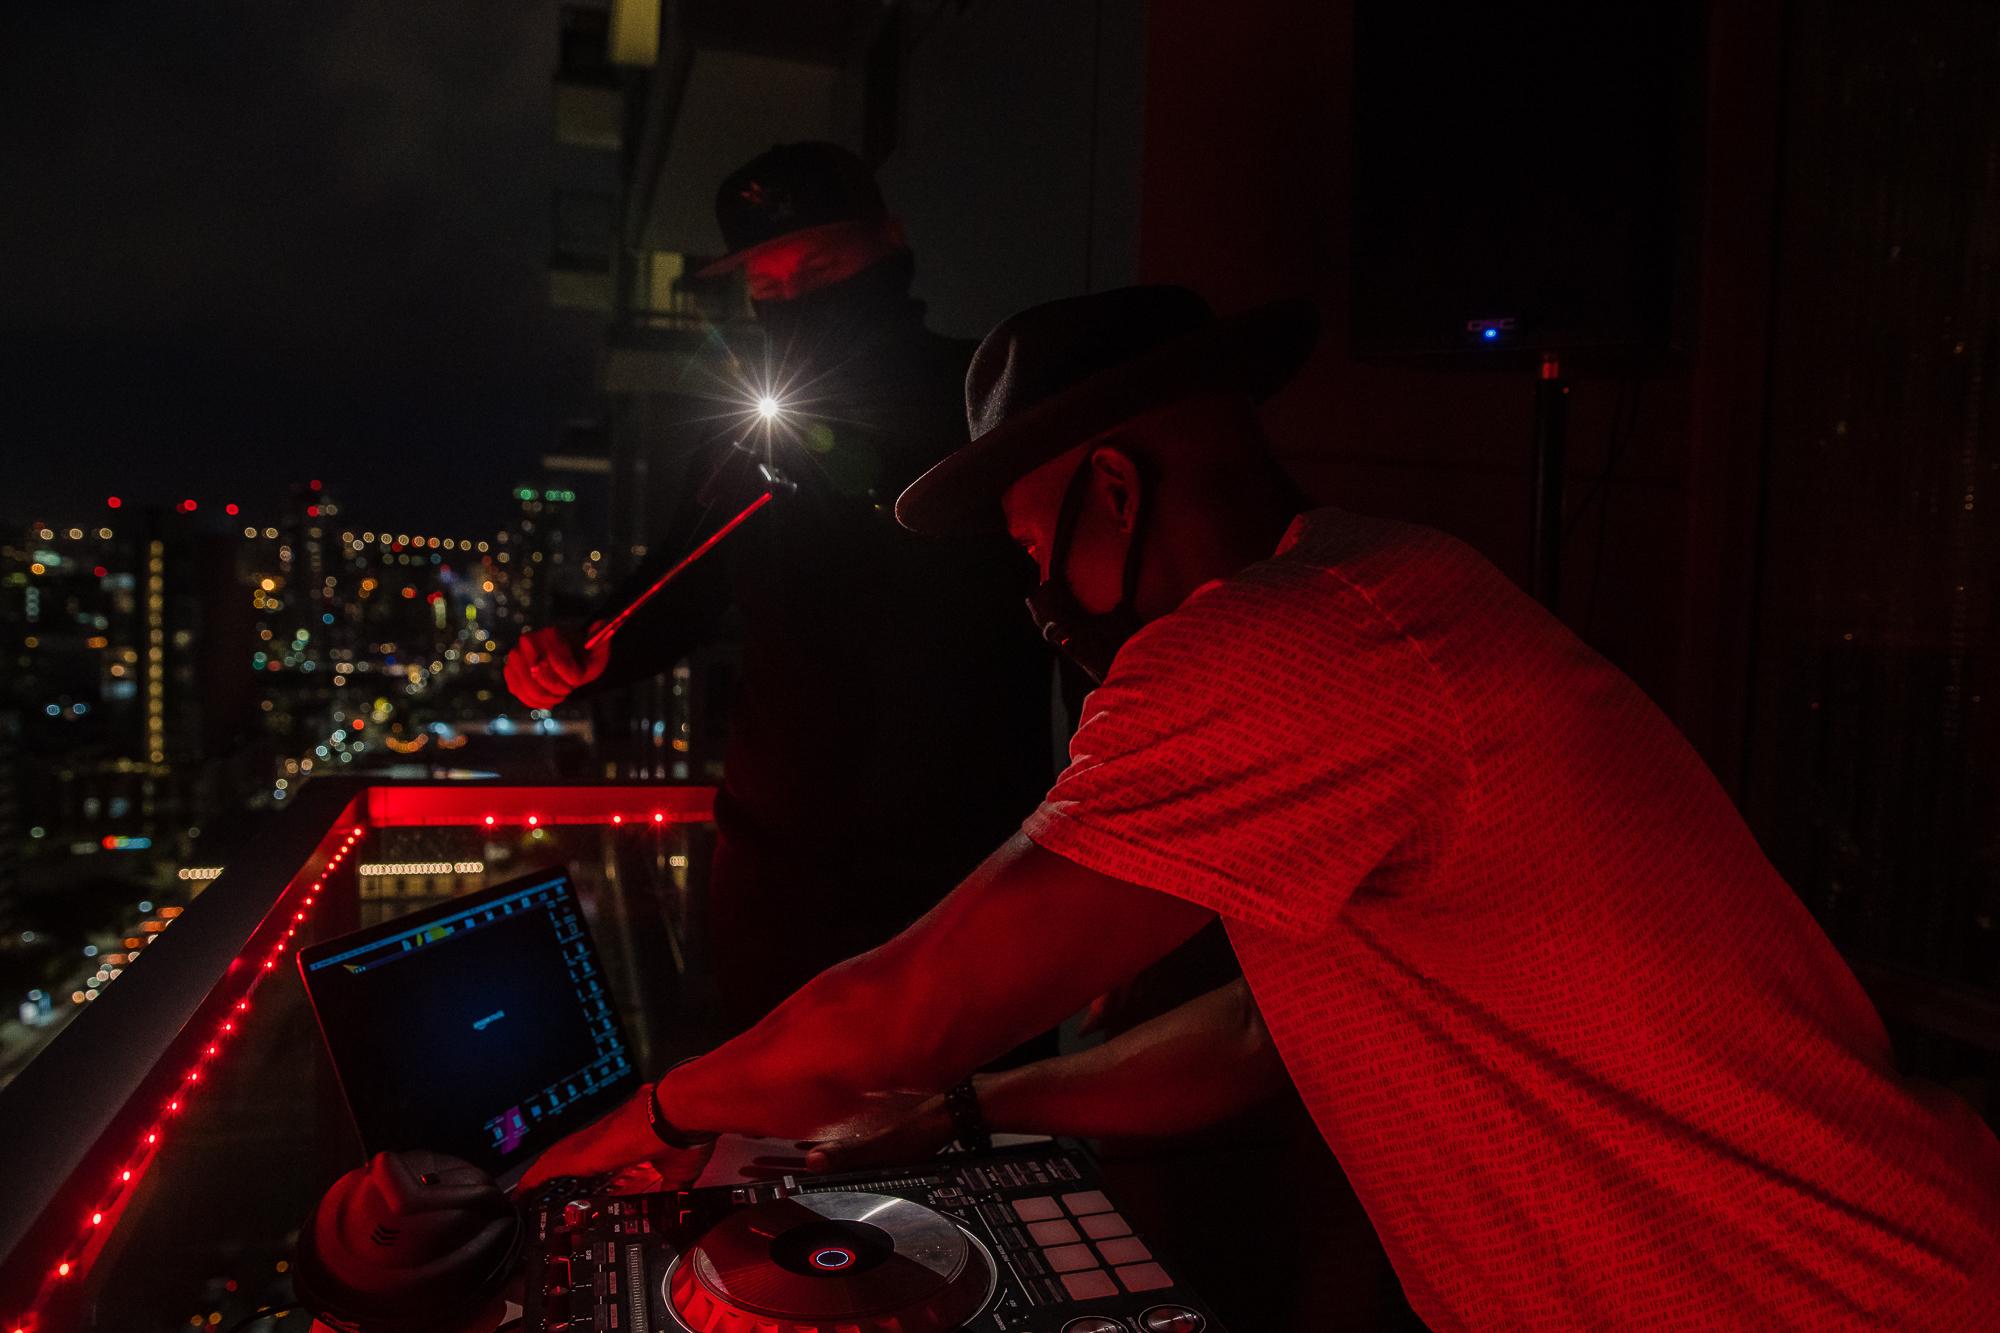 A DJ Cheers Up Locals During a Pandemic - DJ IAMNOEL plays his set while a friend films it for a...